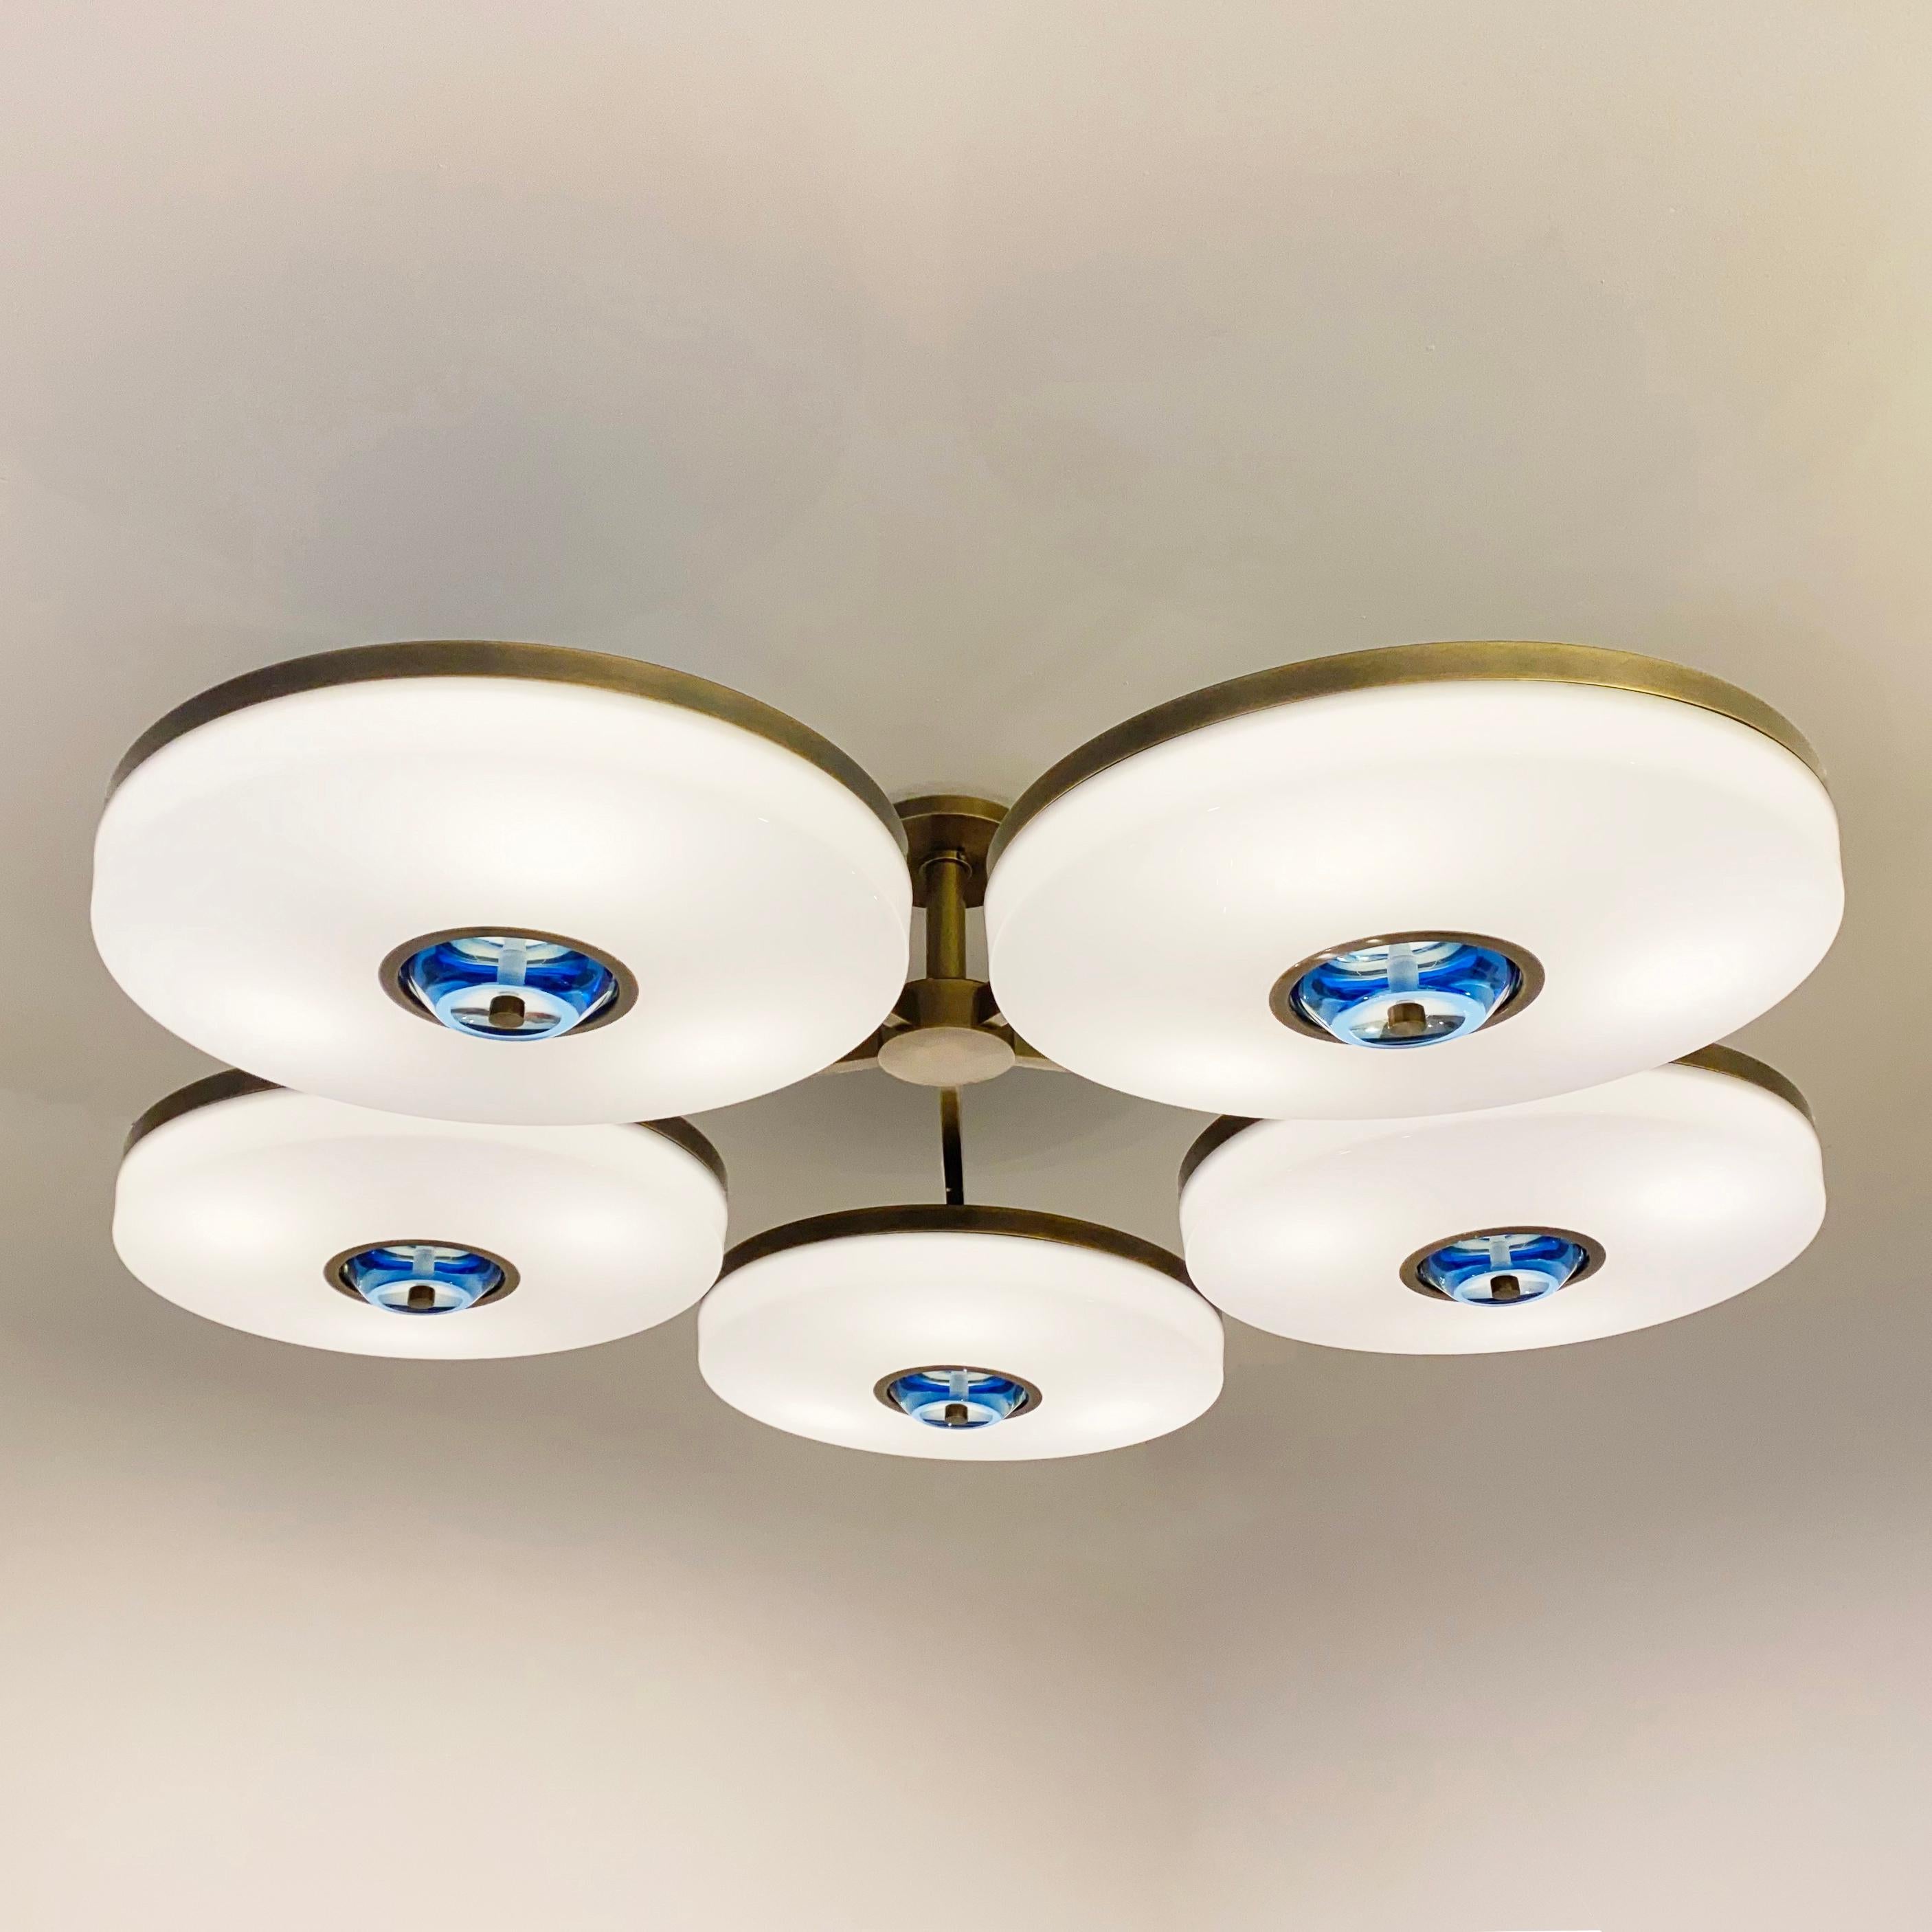 Iris N. 5 Ceiling Light by Gaspare Asaro - Satin Nickel Finish In New Condition For Sale In New York, NY